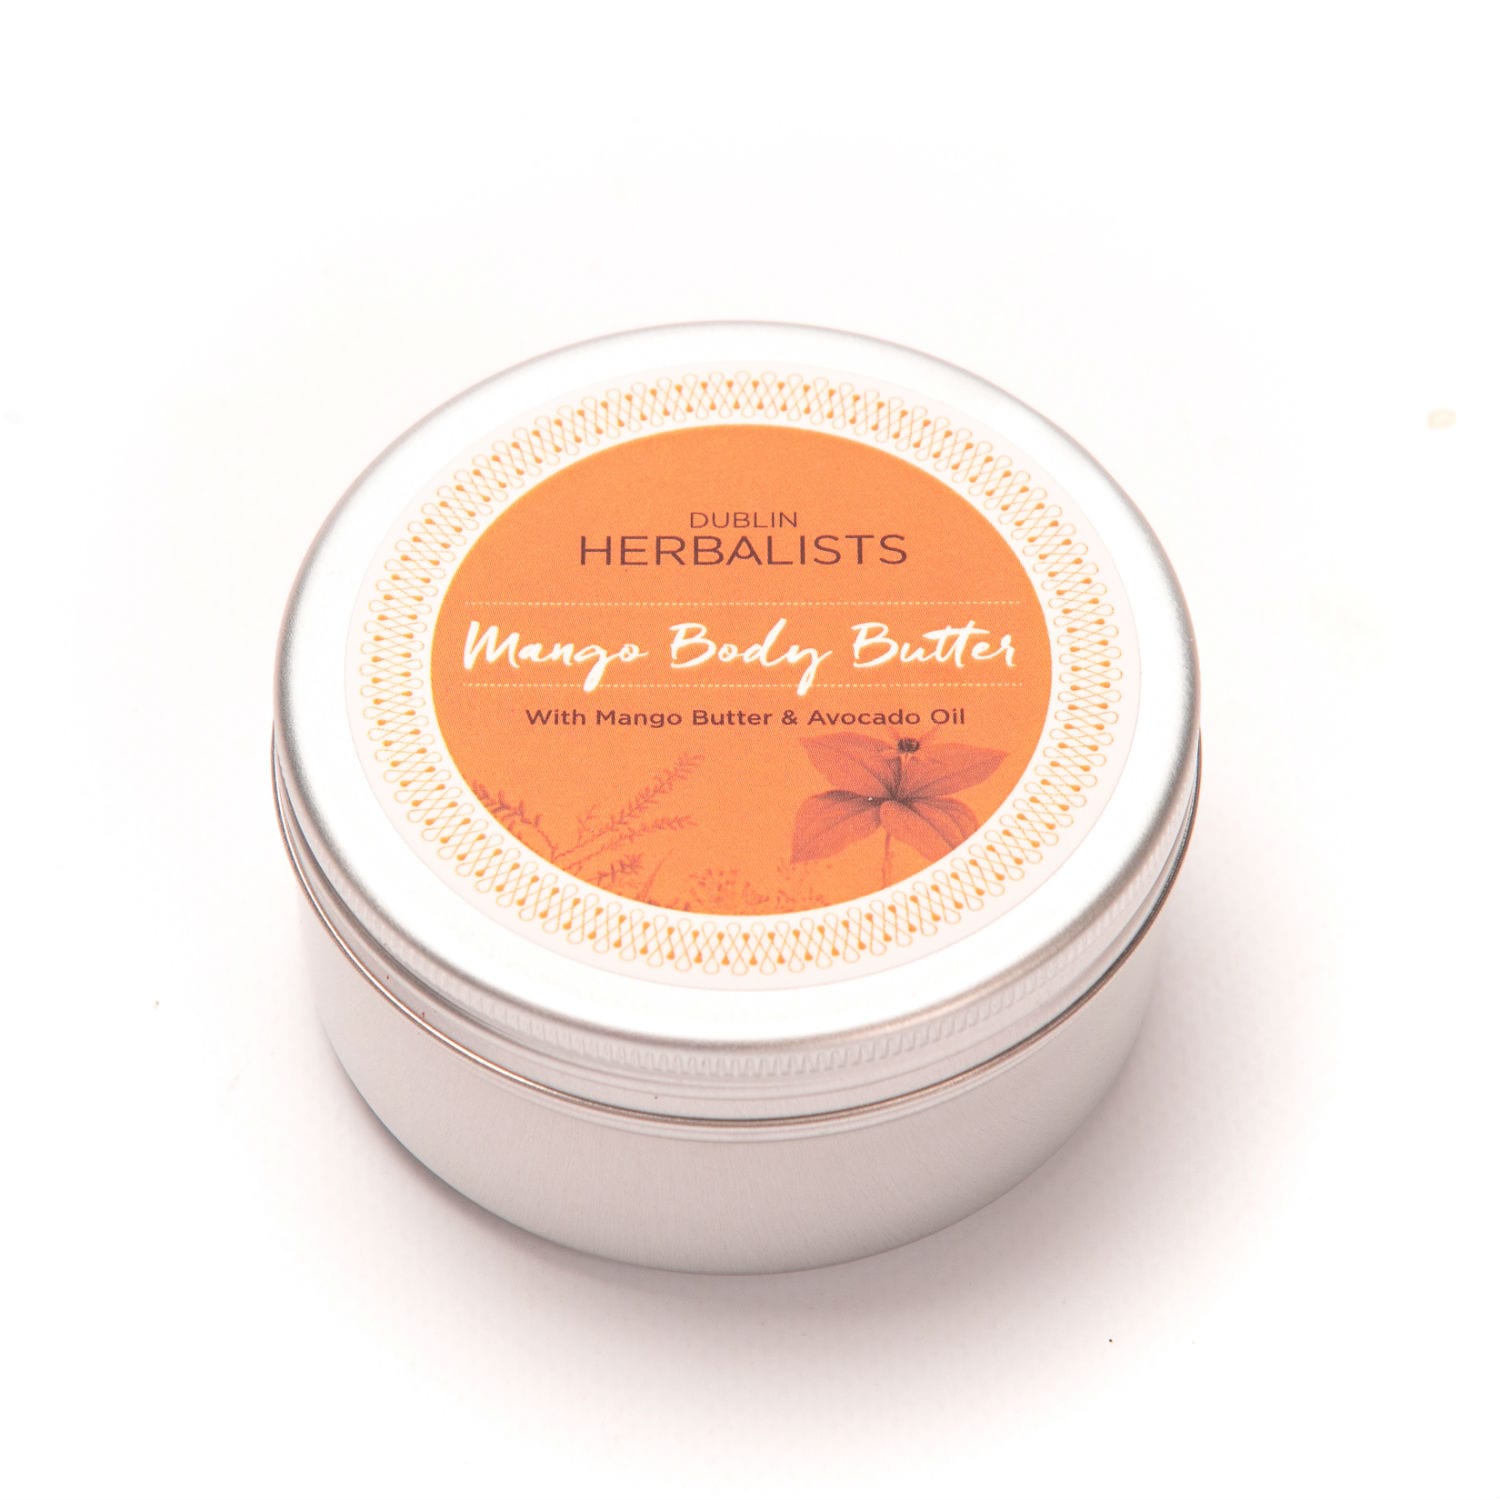 Body cream with shea butter